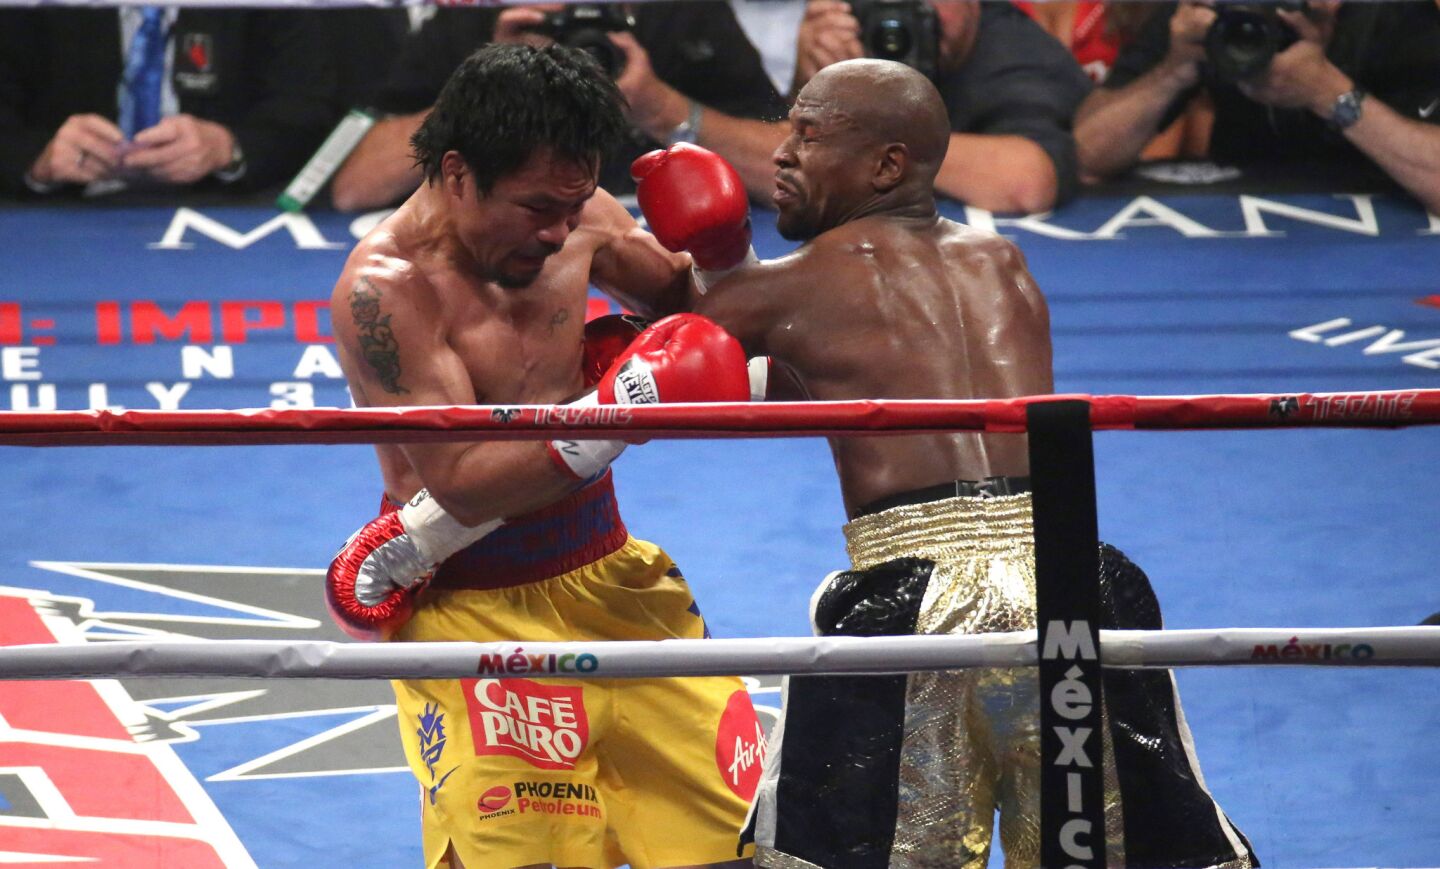 Floyd Mayweather Jr., right, trades blows with Manny Pacquiao.